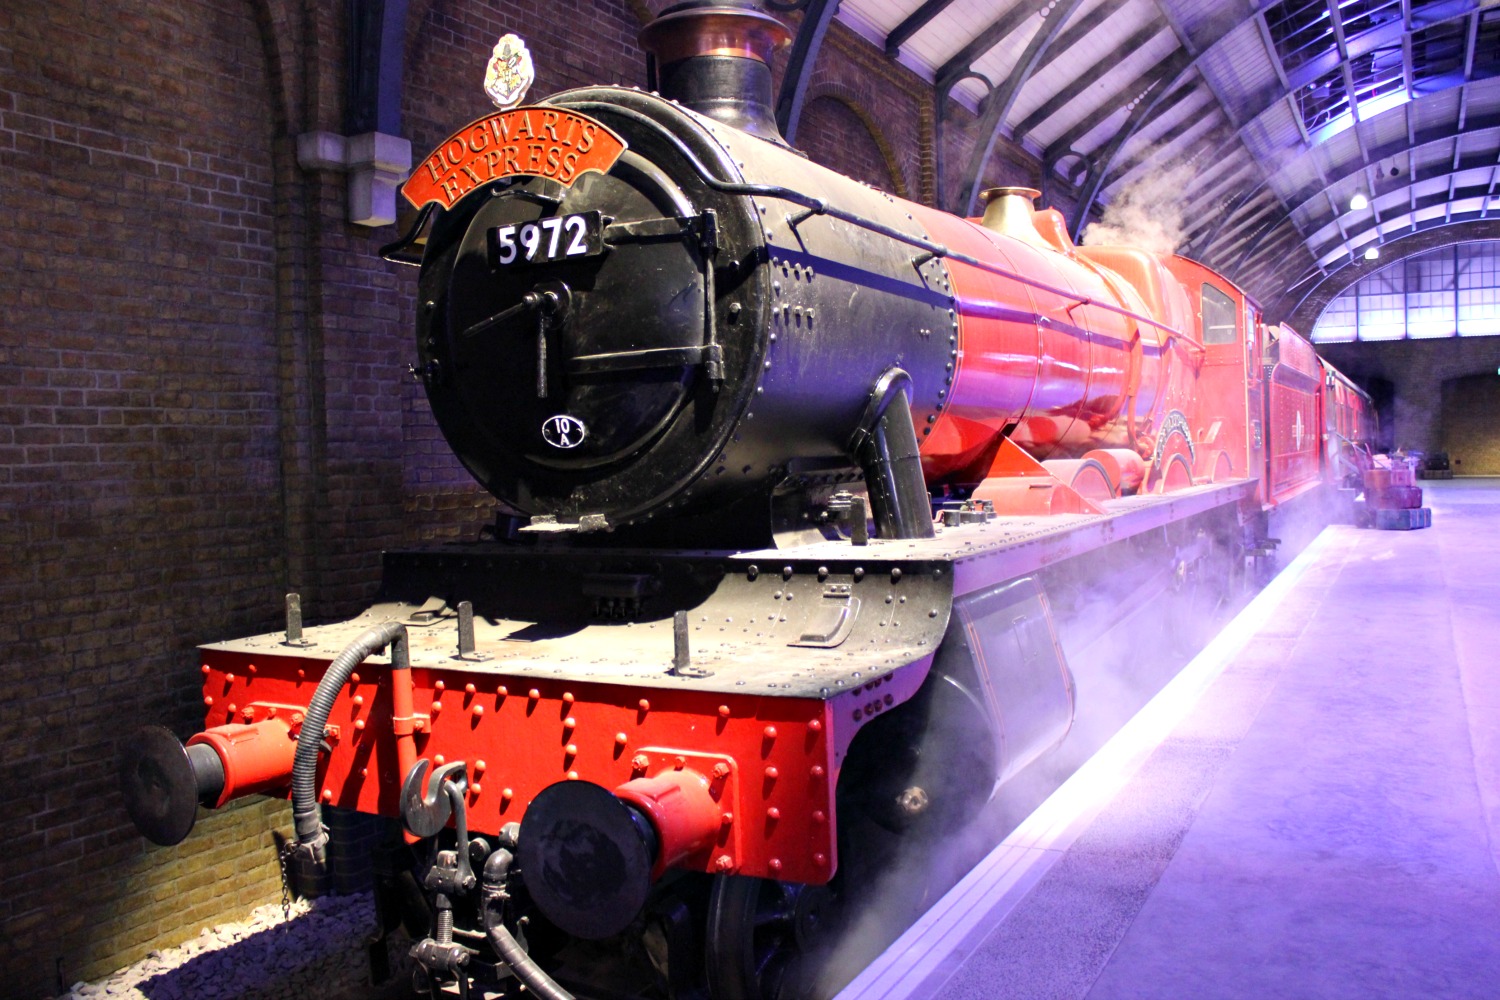 The Hogwarts Express at the Warner Bros Studio tour in Hertfordshire - my tips on visiting Harry Potter World in London